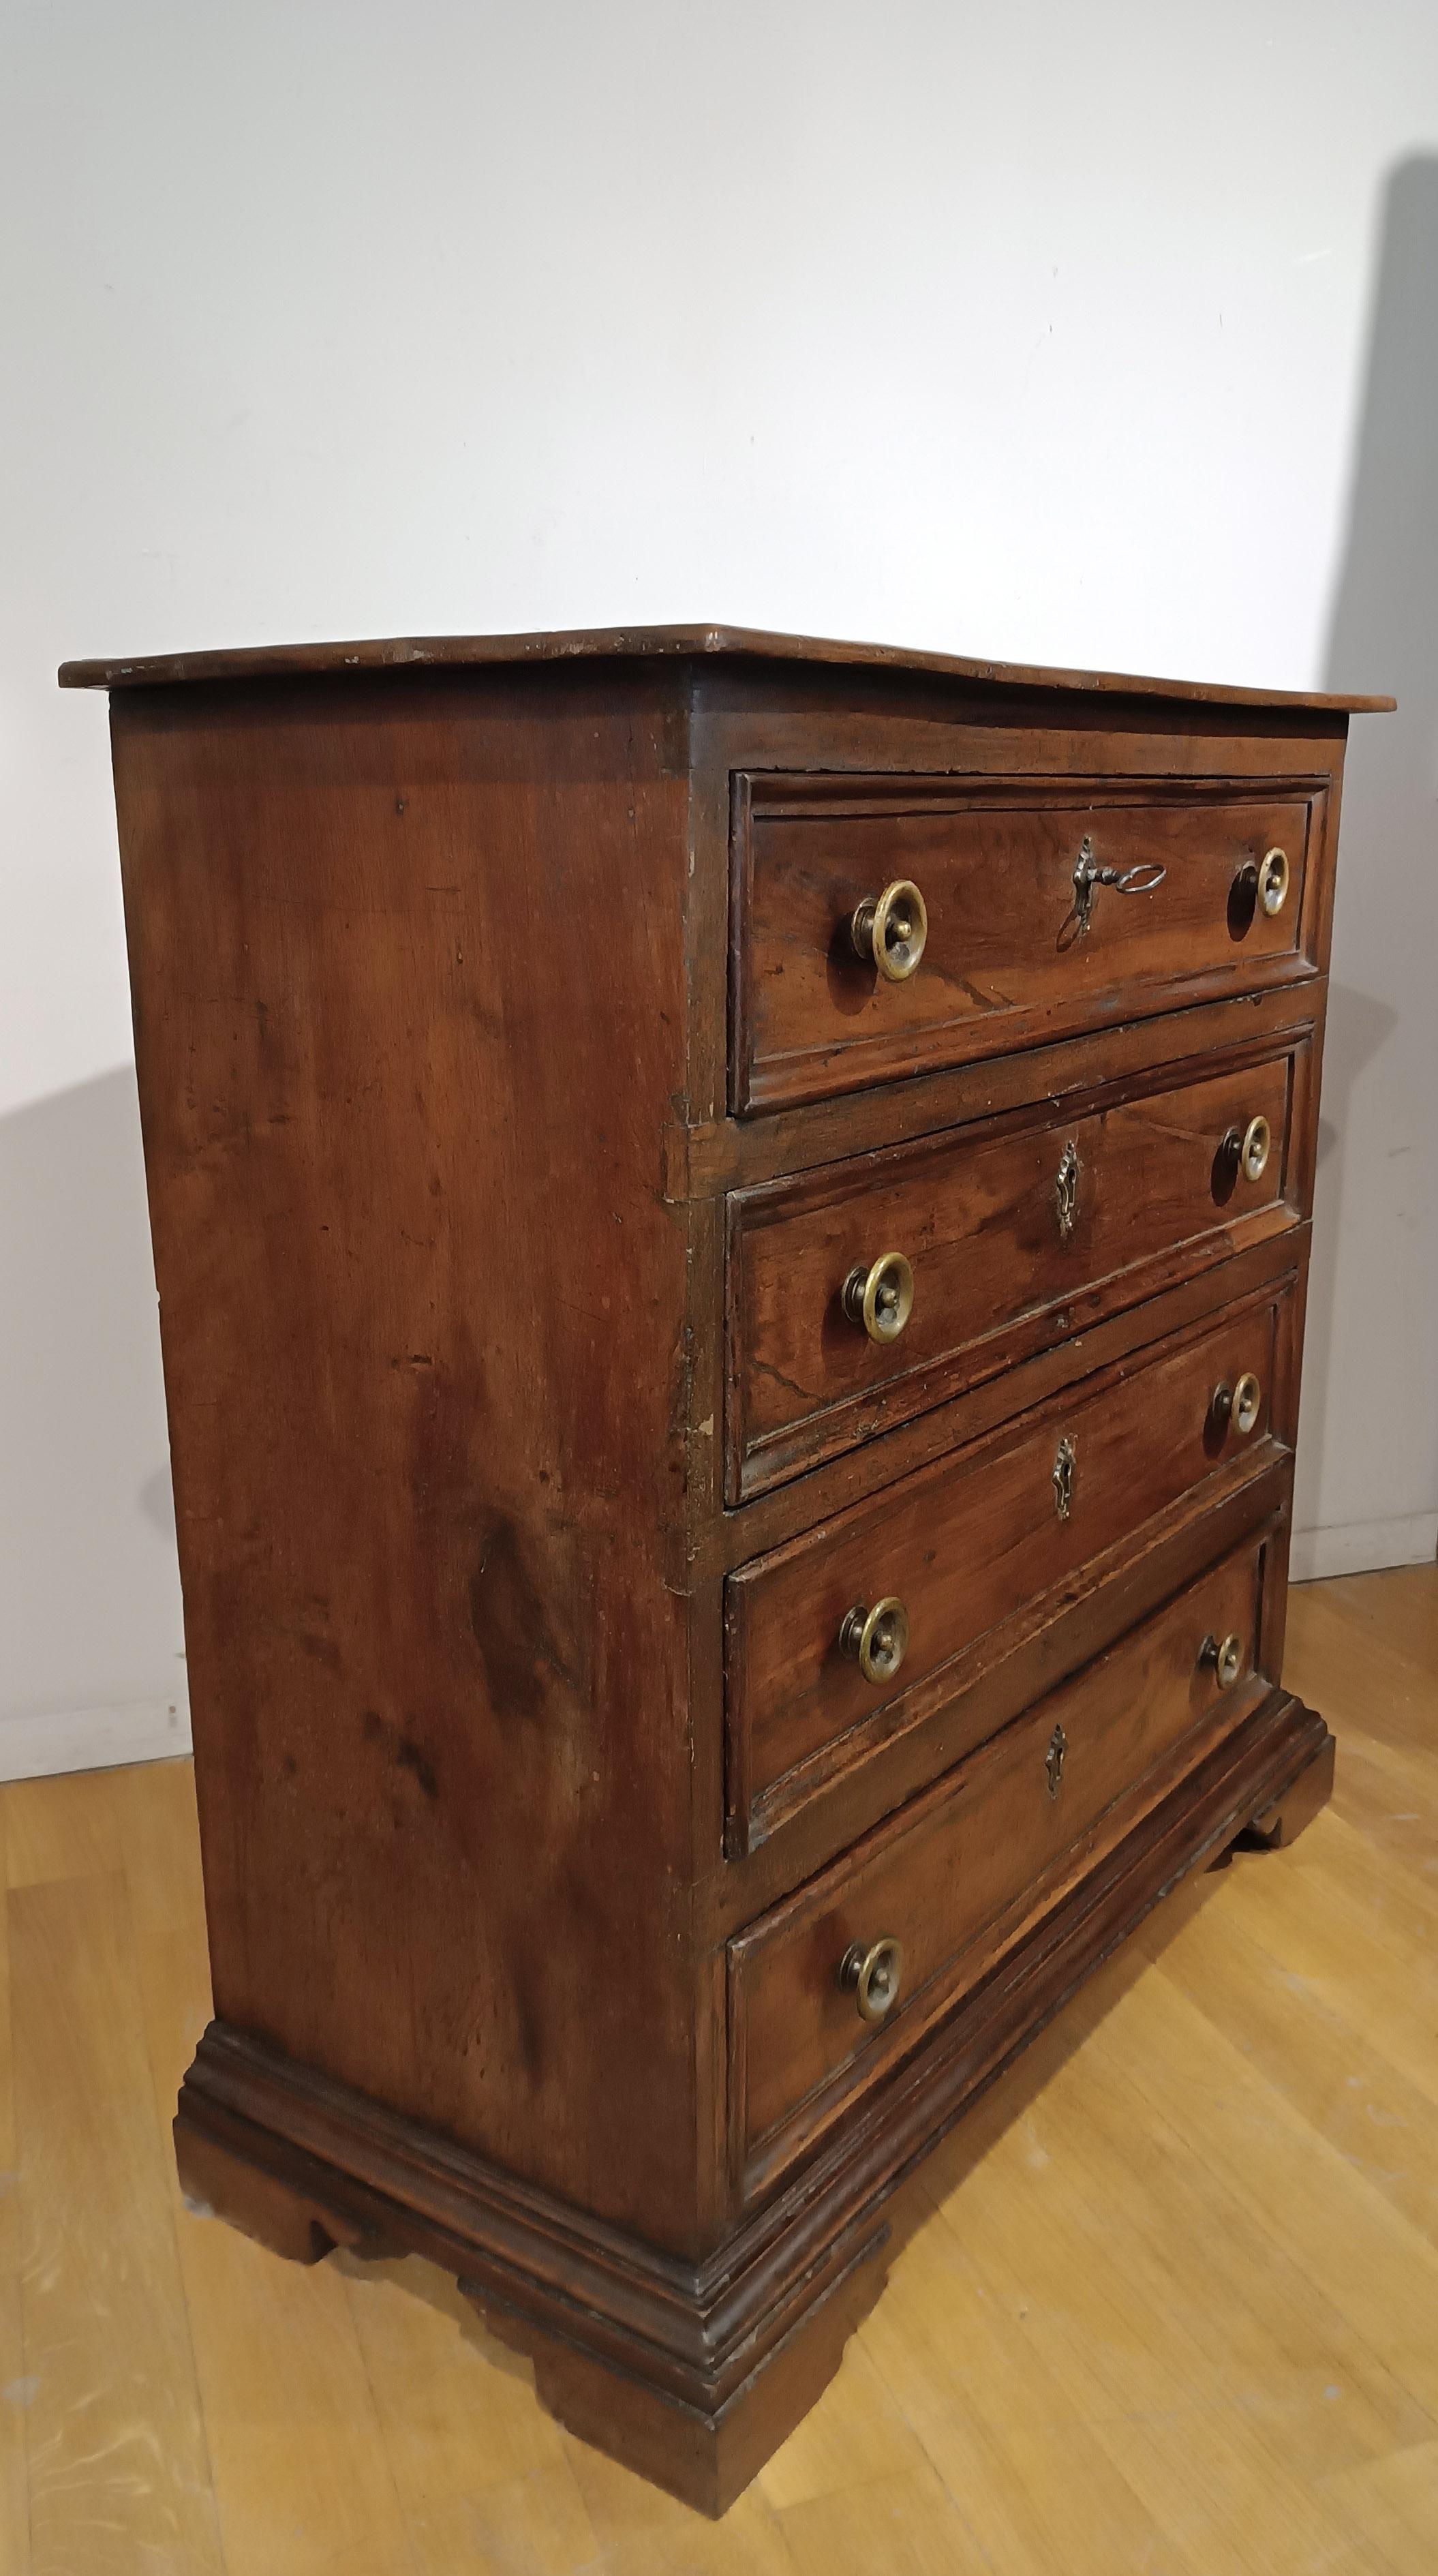 Italian 17th CENTURY CHEST OF DRAWERS IN SOLID AND VENEREED WALNUT For Sale